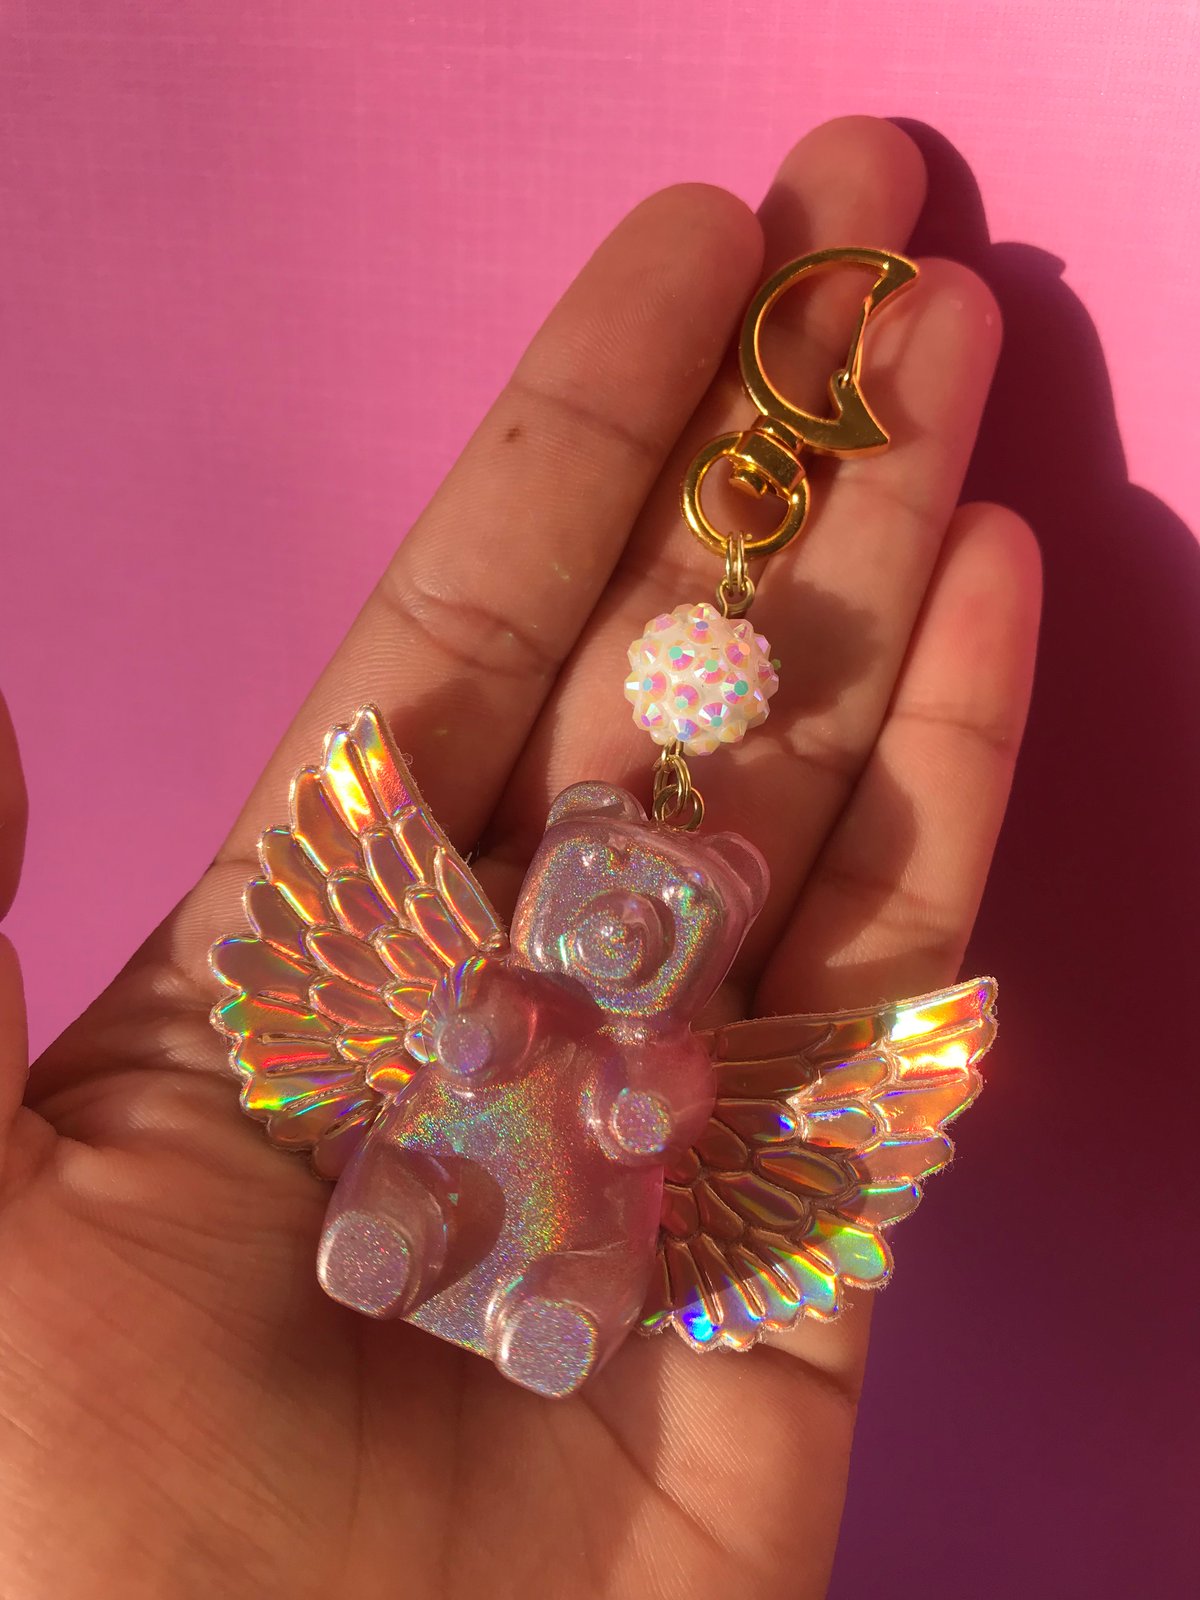 Image of Large Holo Resin Angel Gummy Bear Charm Keychain with Gold Clasp